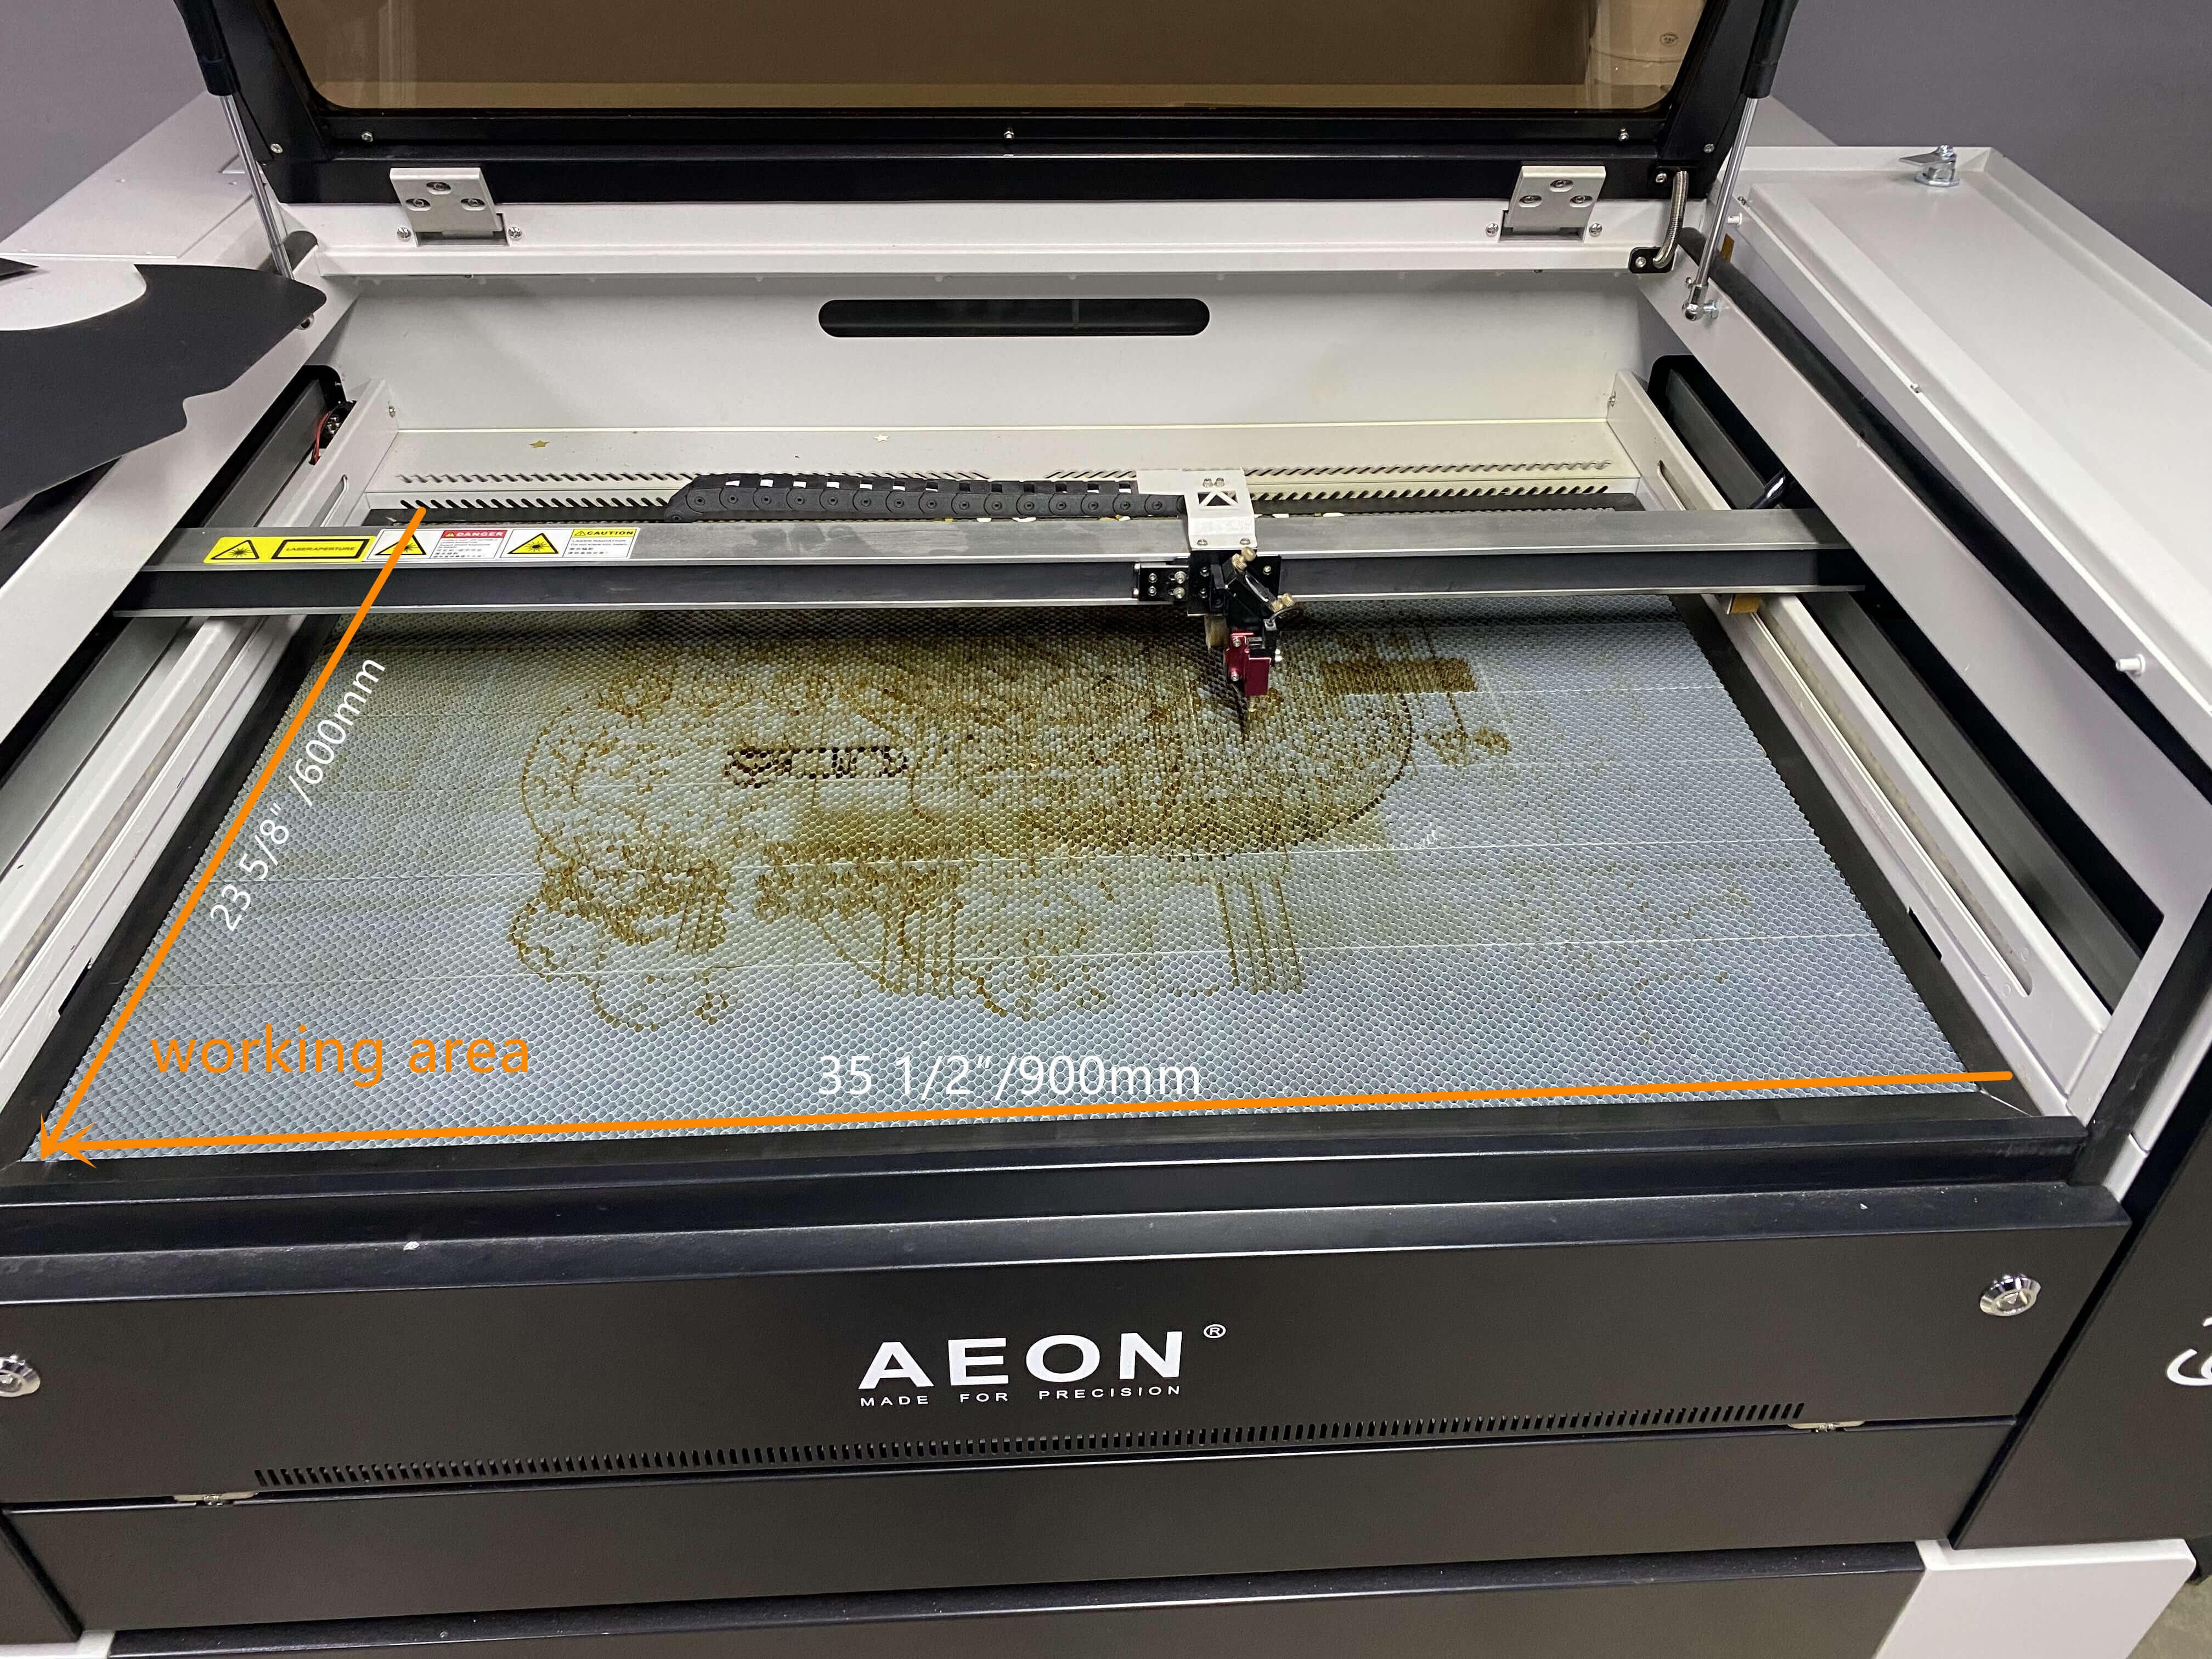 Should you buy a laser engraver? Everything you need to know